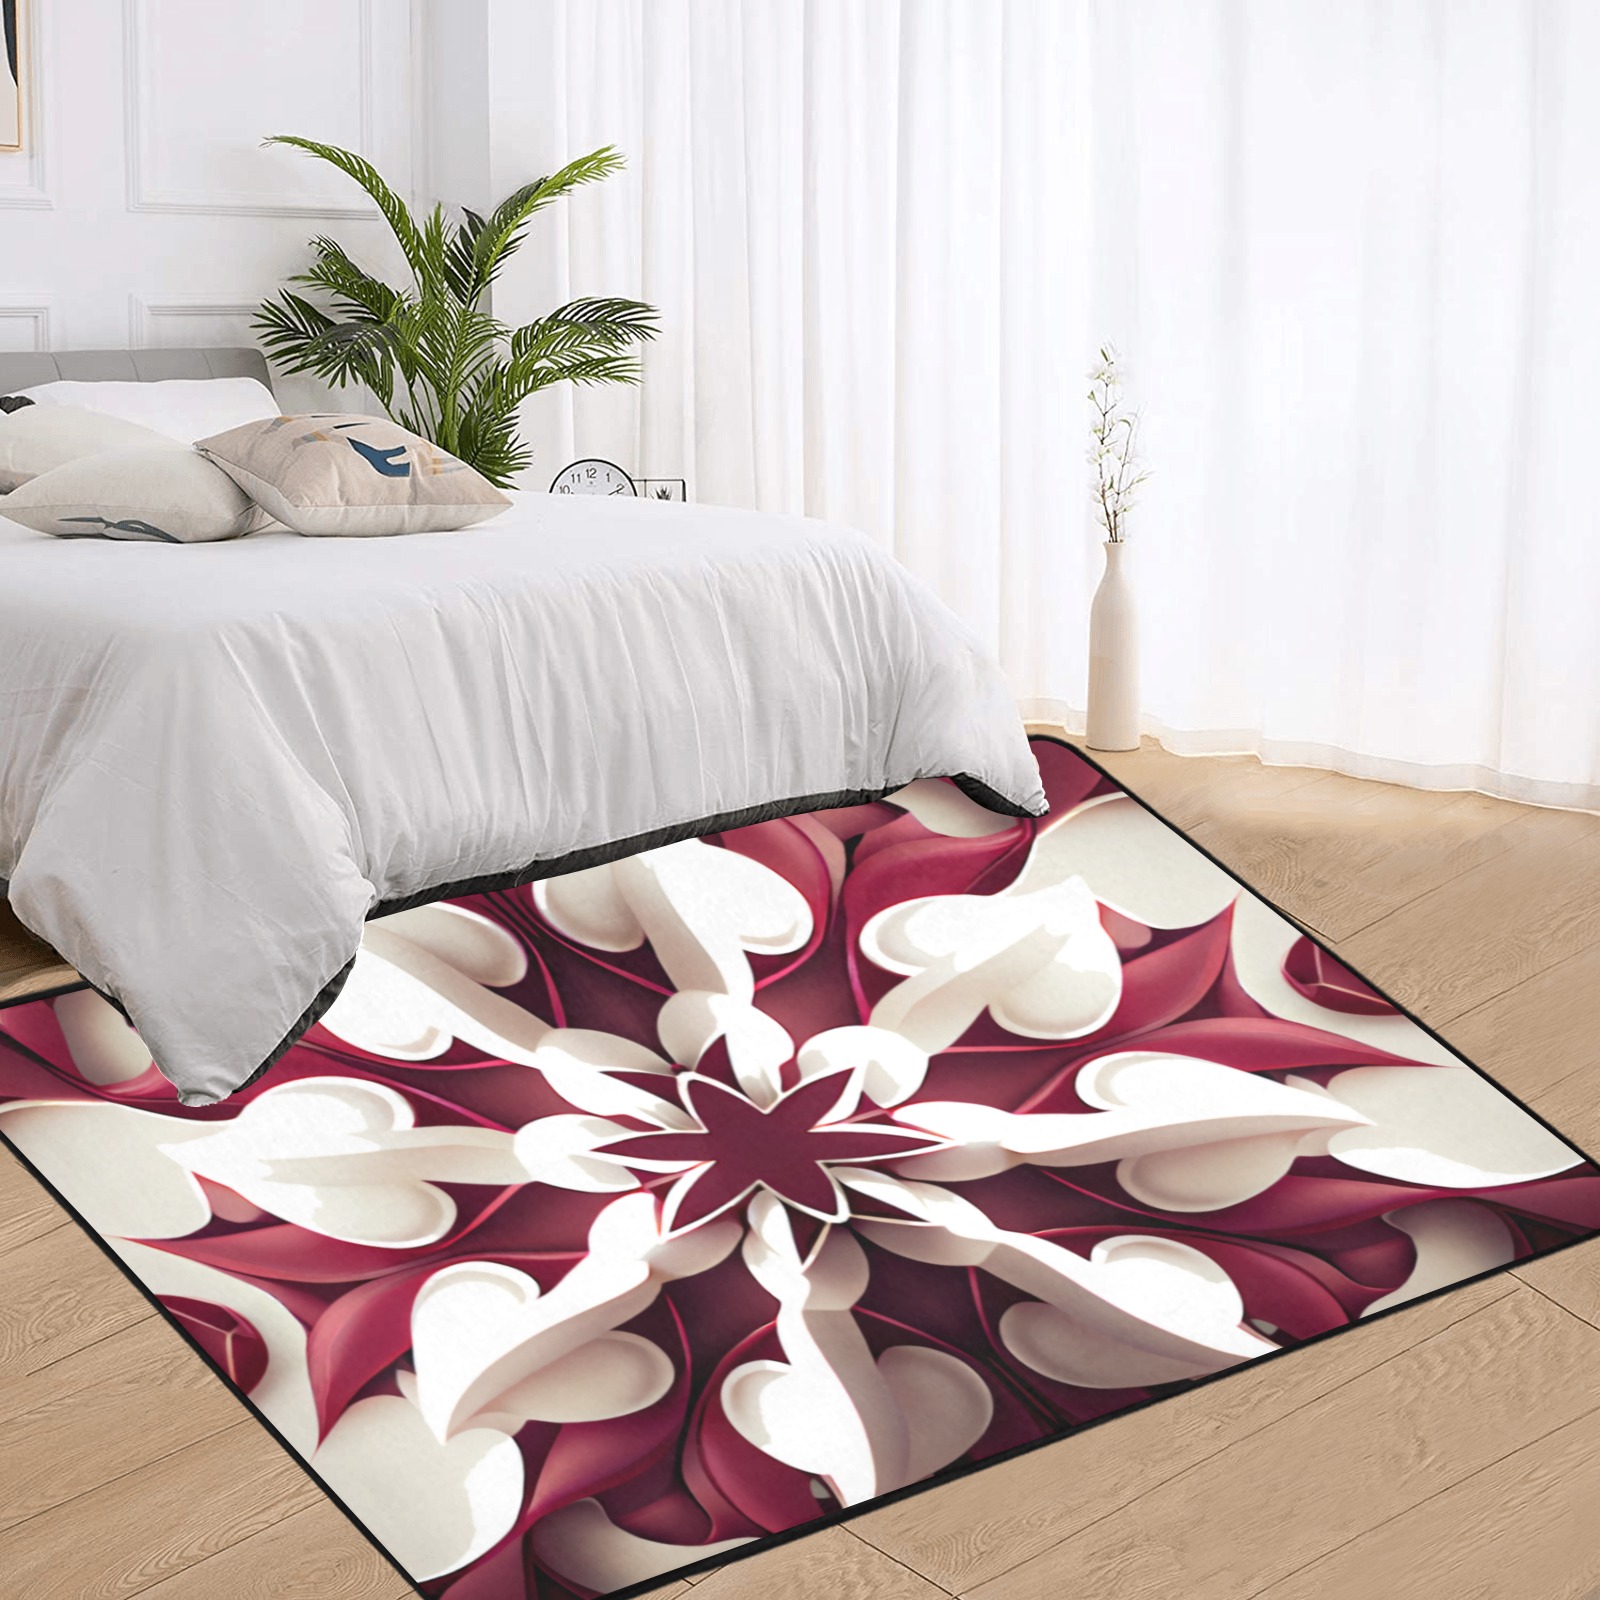 red and white floral pattern Area Rug with Black Binding 7'x5'